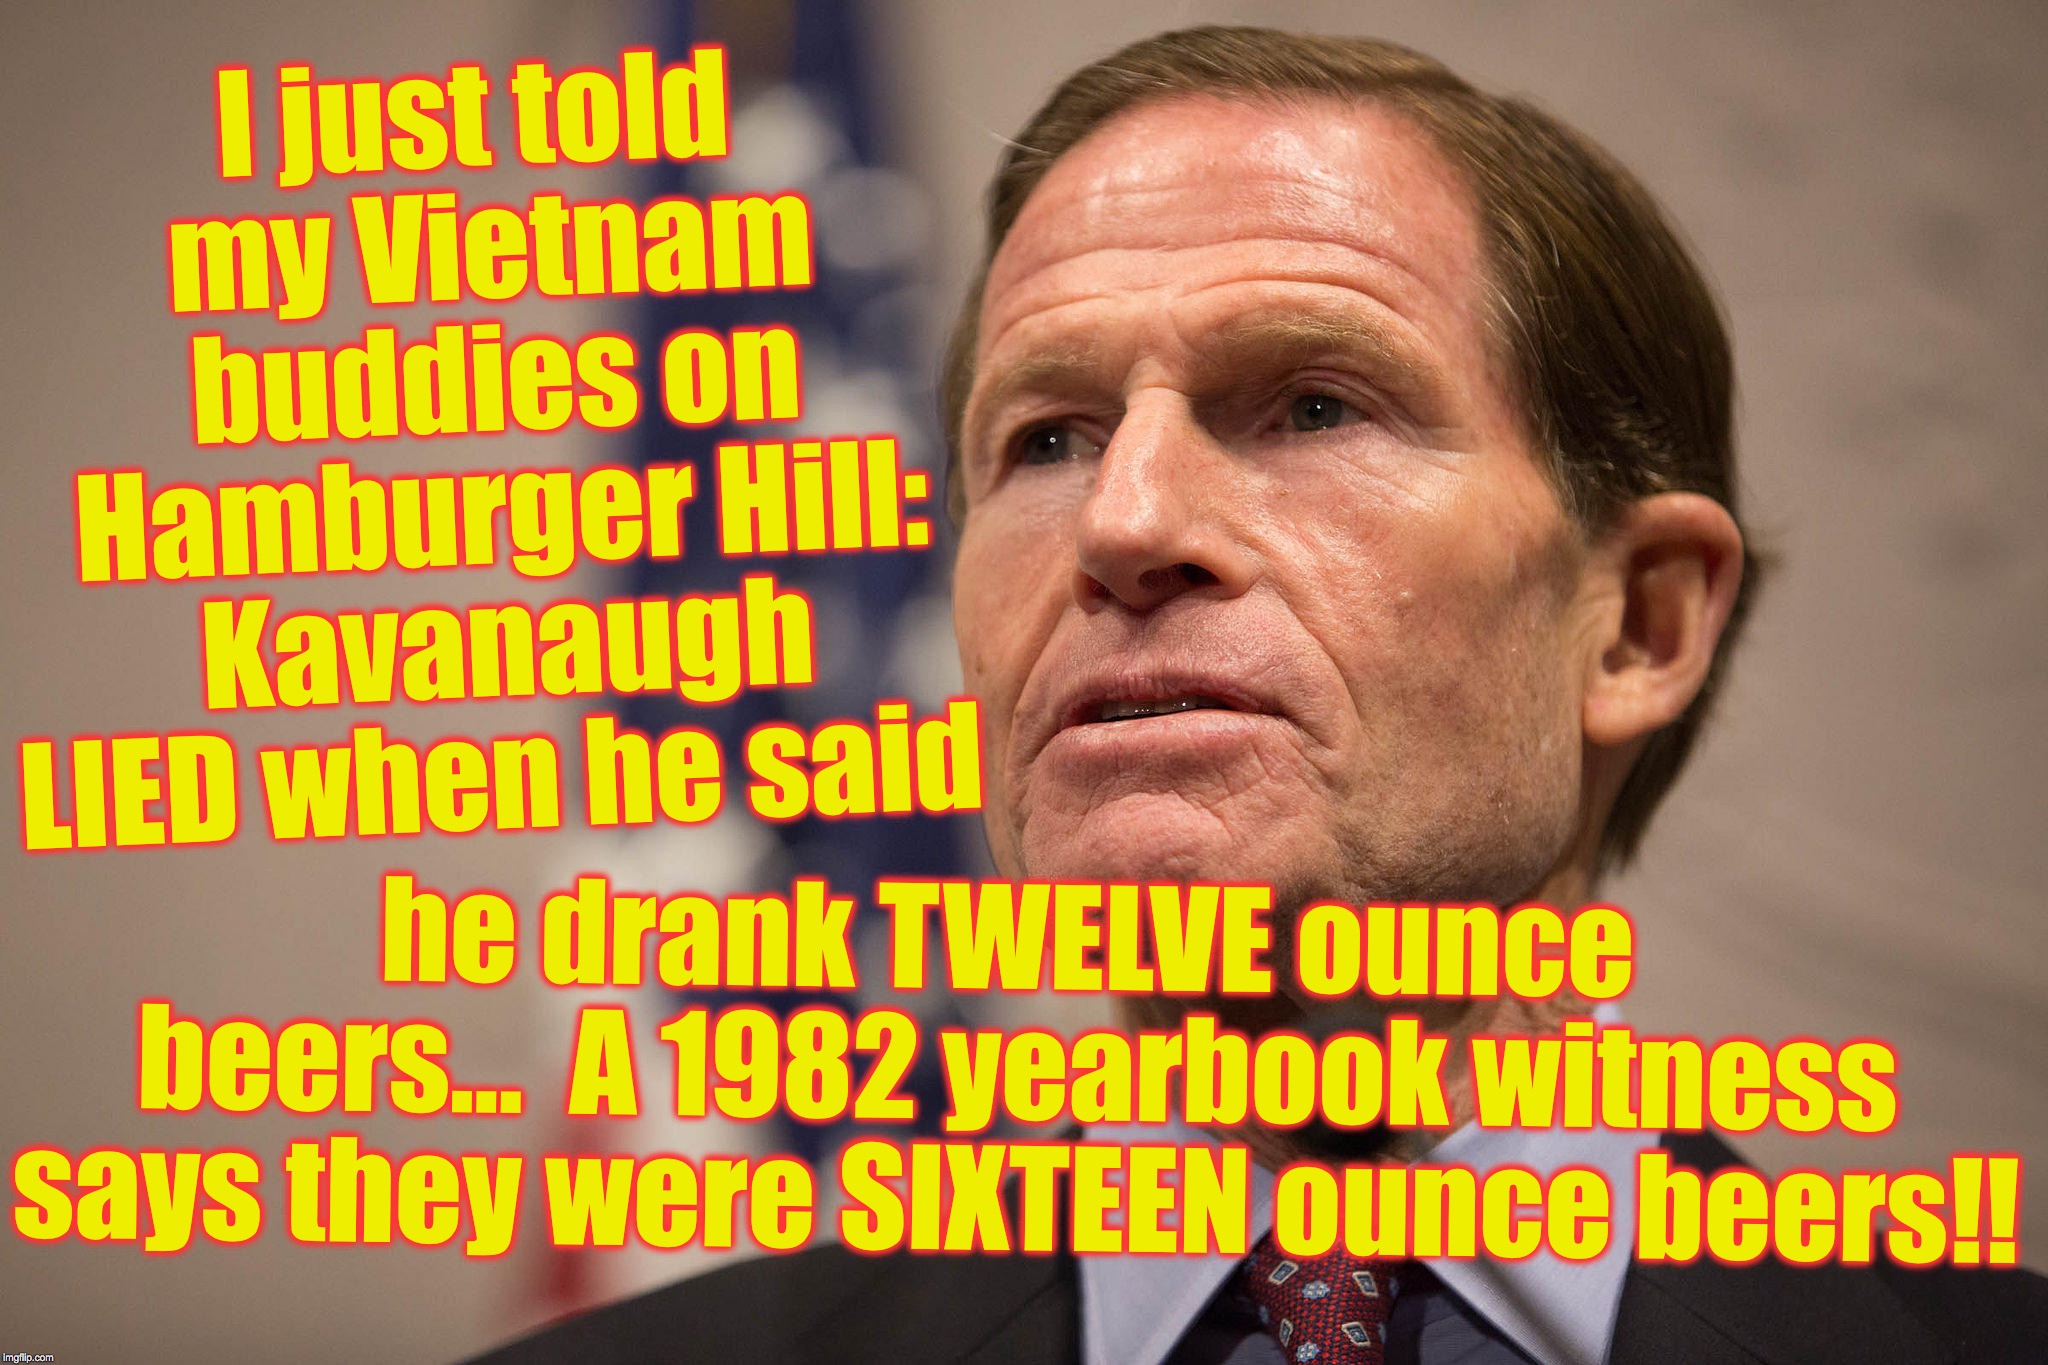 Sen. Blumenthal -- phony Vietnam hero | I just told my Vietnam buddies on Hamburger Hill: Kavanaugh LIED when he said; he drank TWELVE ounce beers...  A 1982 yearbook witness says they were SIXTEEN ounce beers!! | image tagged in lying | made w/ Imgflip meme maker